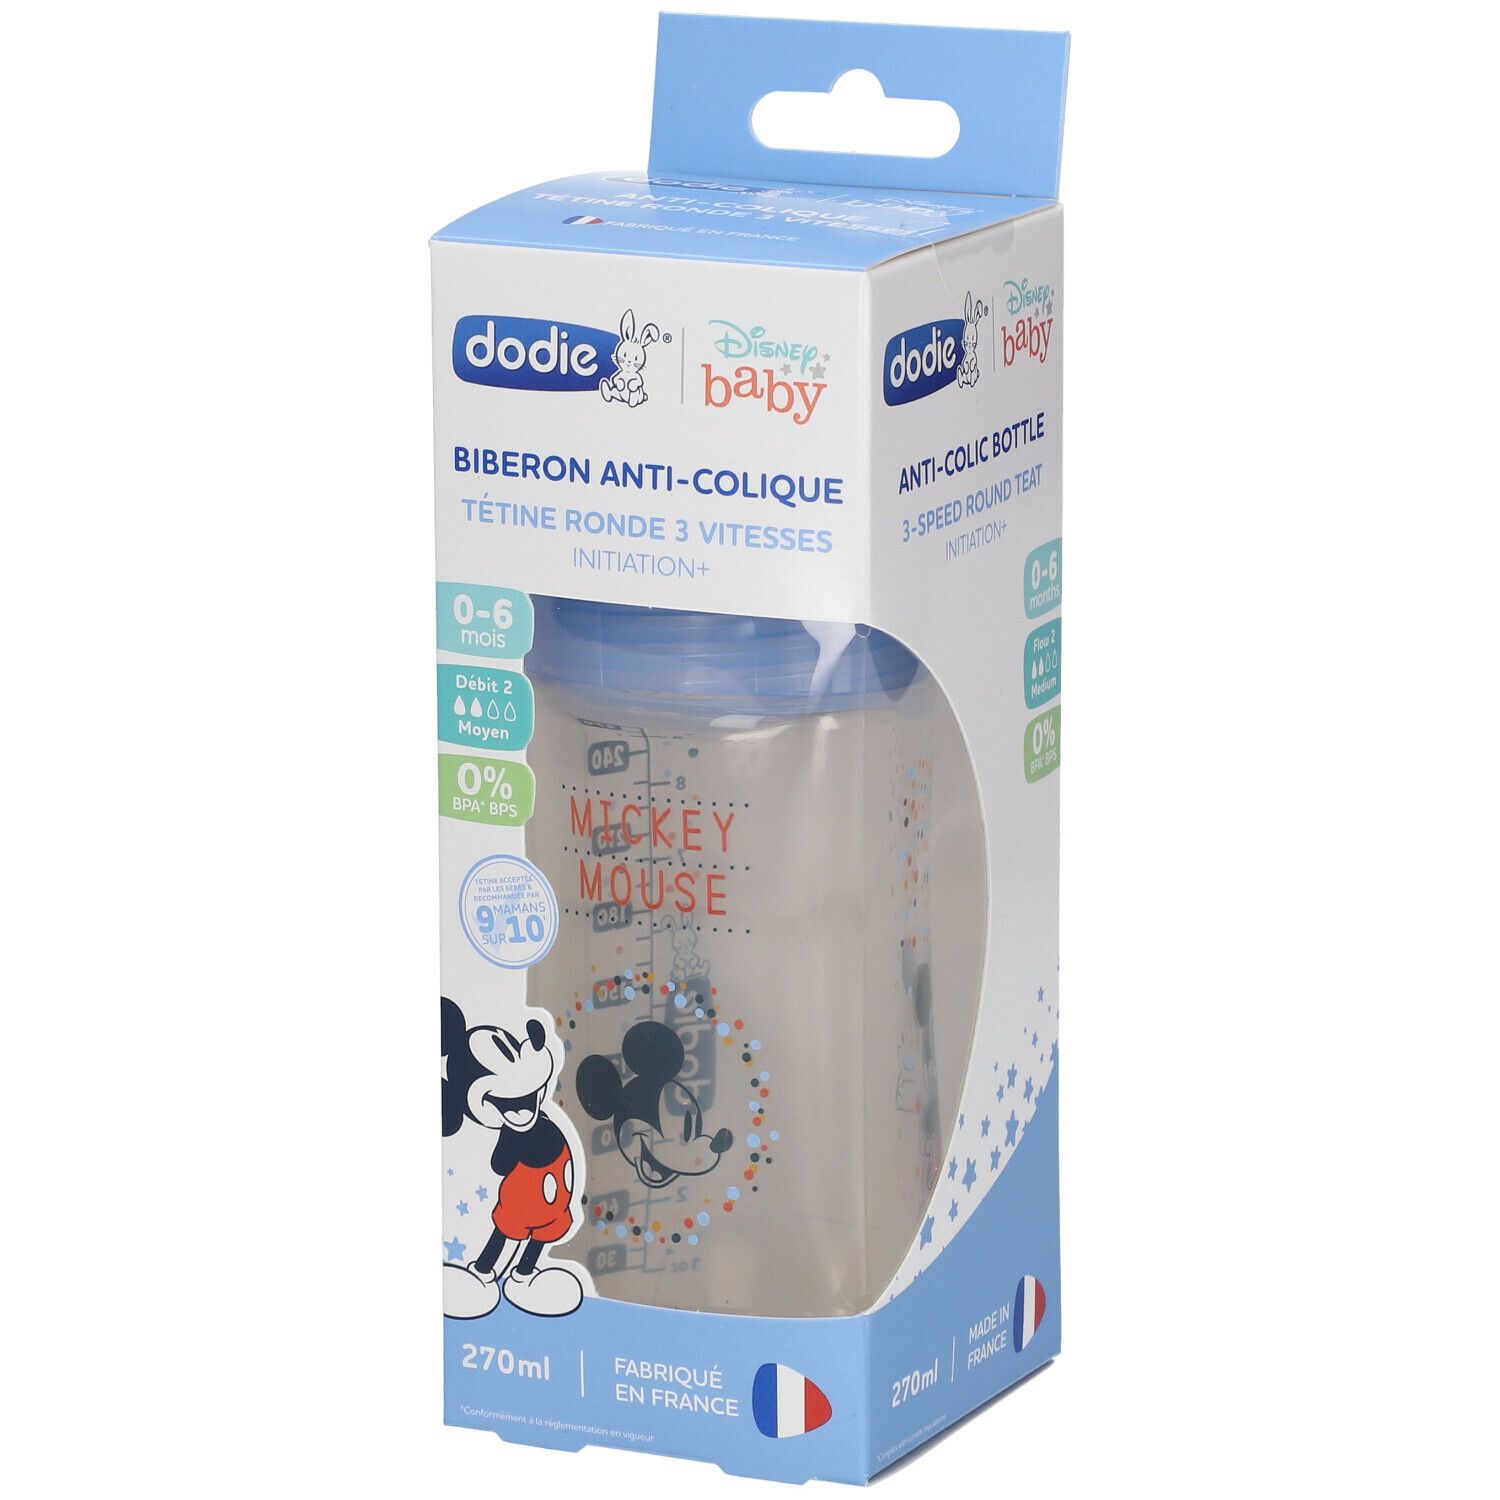 DODIE Anti colique 0-6 mois 150 ml mickey mouse - Dodie - Biberons